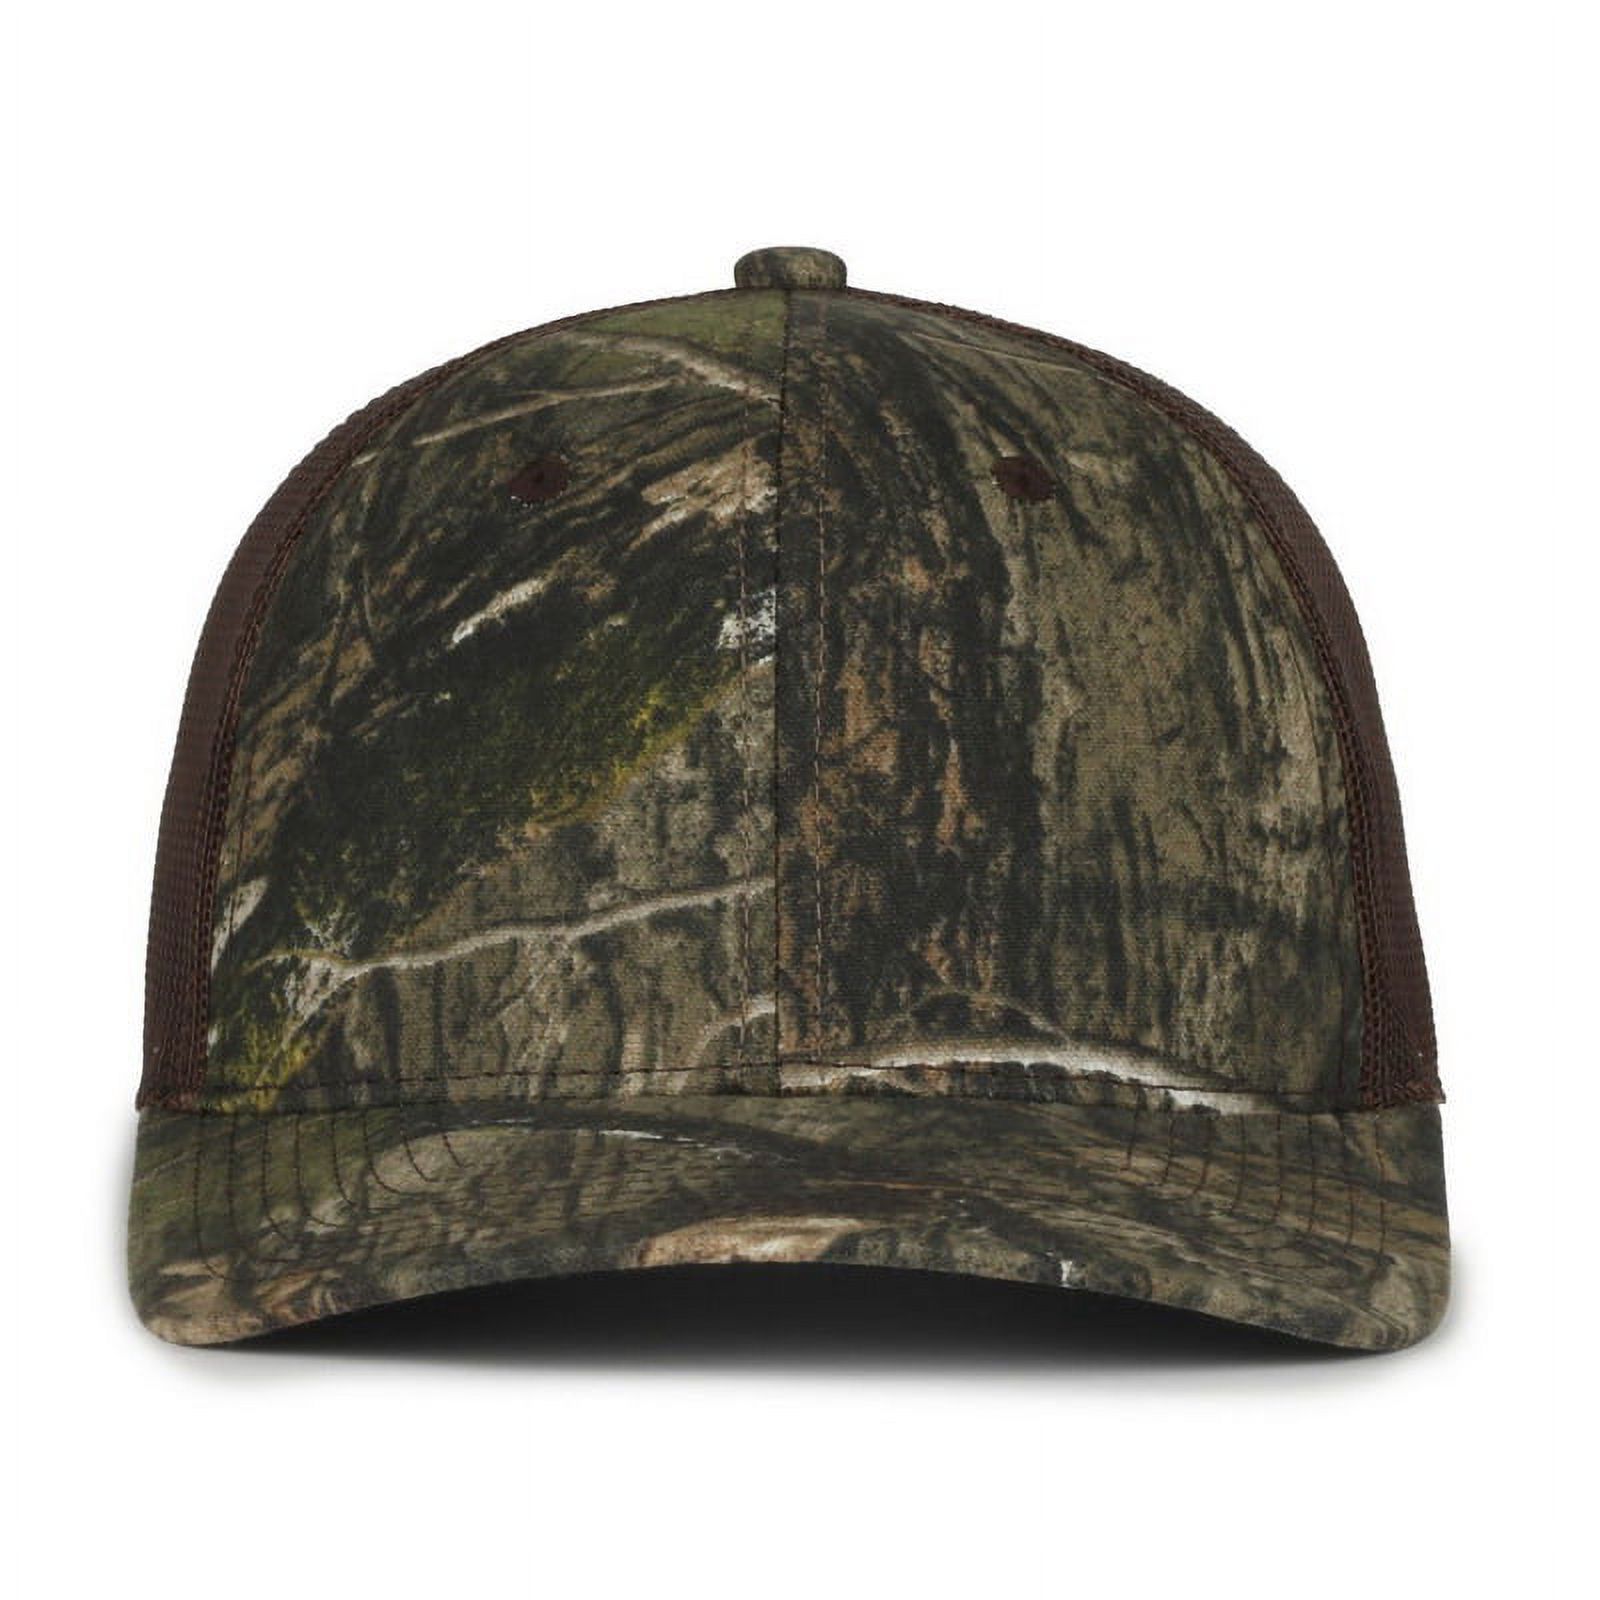 Outdoor Cap MB2020CAMO Canvas Camo Front Panels-Mossy Oak Country DNA ...